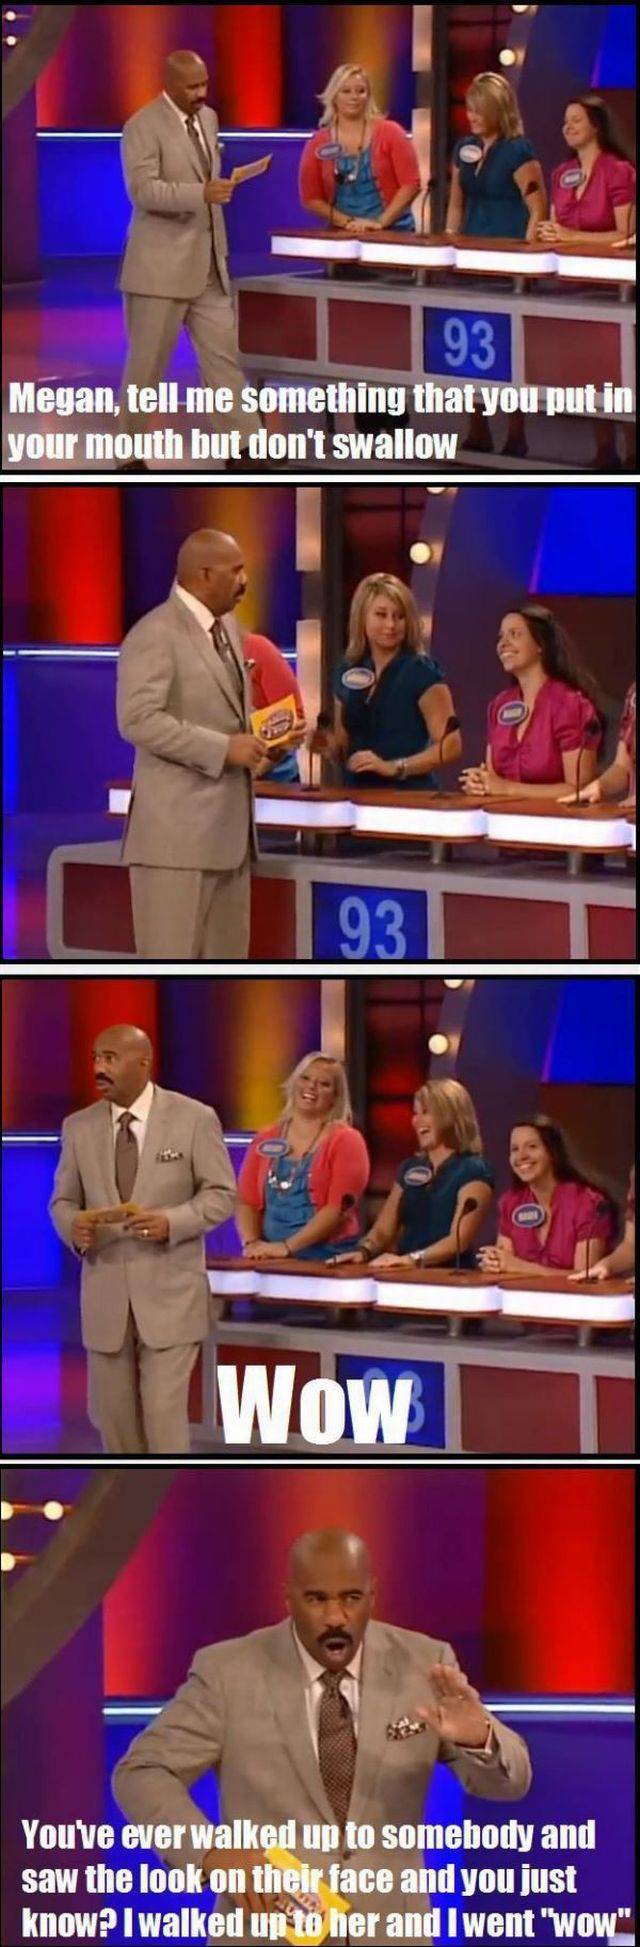 game show funny - 93 Megan, tell me something that you put in your mouth but don't swallow 93 Wow Youve ever walked up to somebody and saw the look on their face and you just know? I walked up to her and I went "wow".